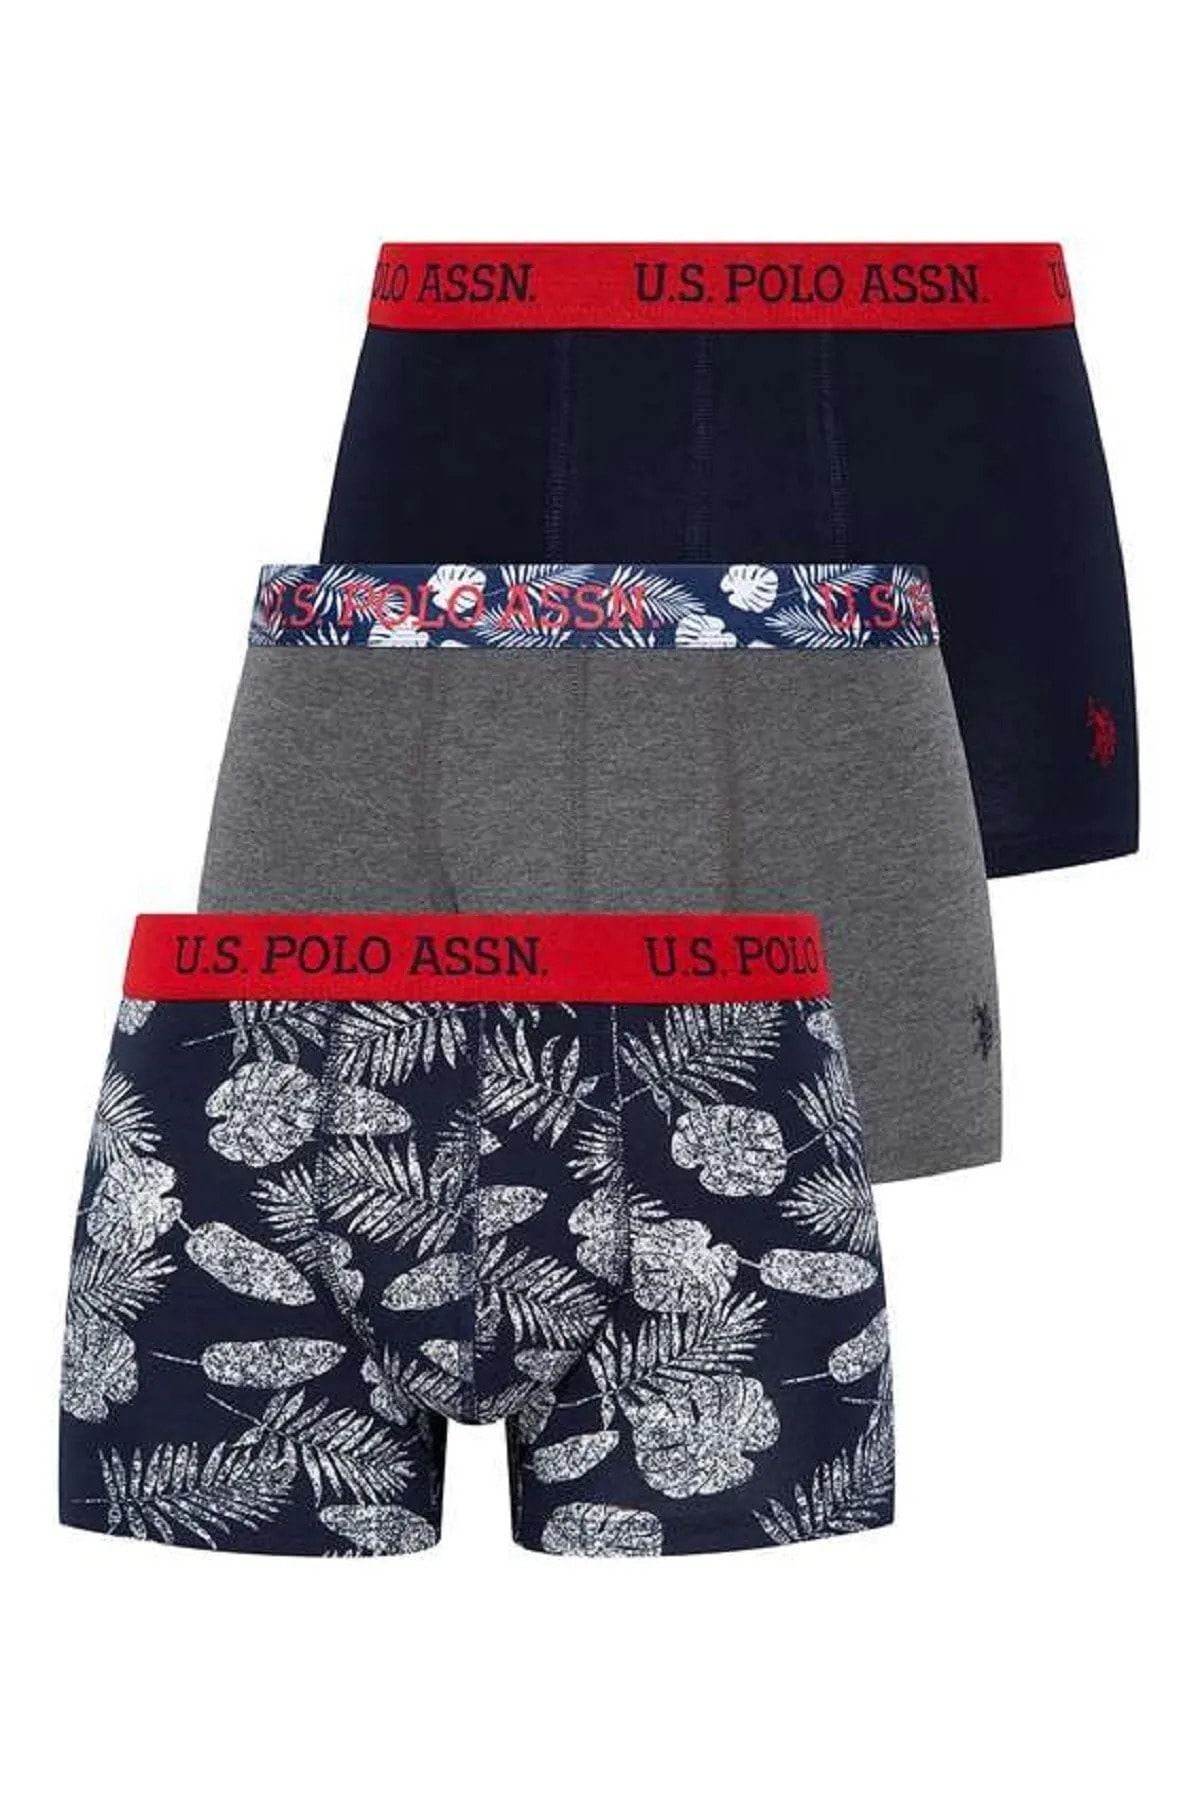 U.S. Polo Assn. 3-Piece Cotton and Lycra Mixed Color Men's Boxers - Trendyol